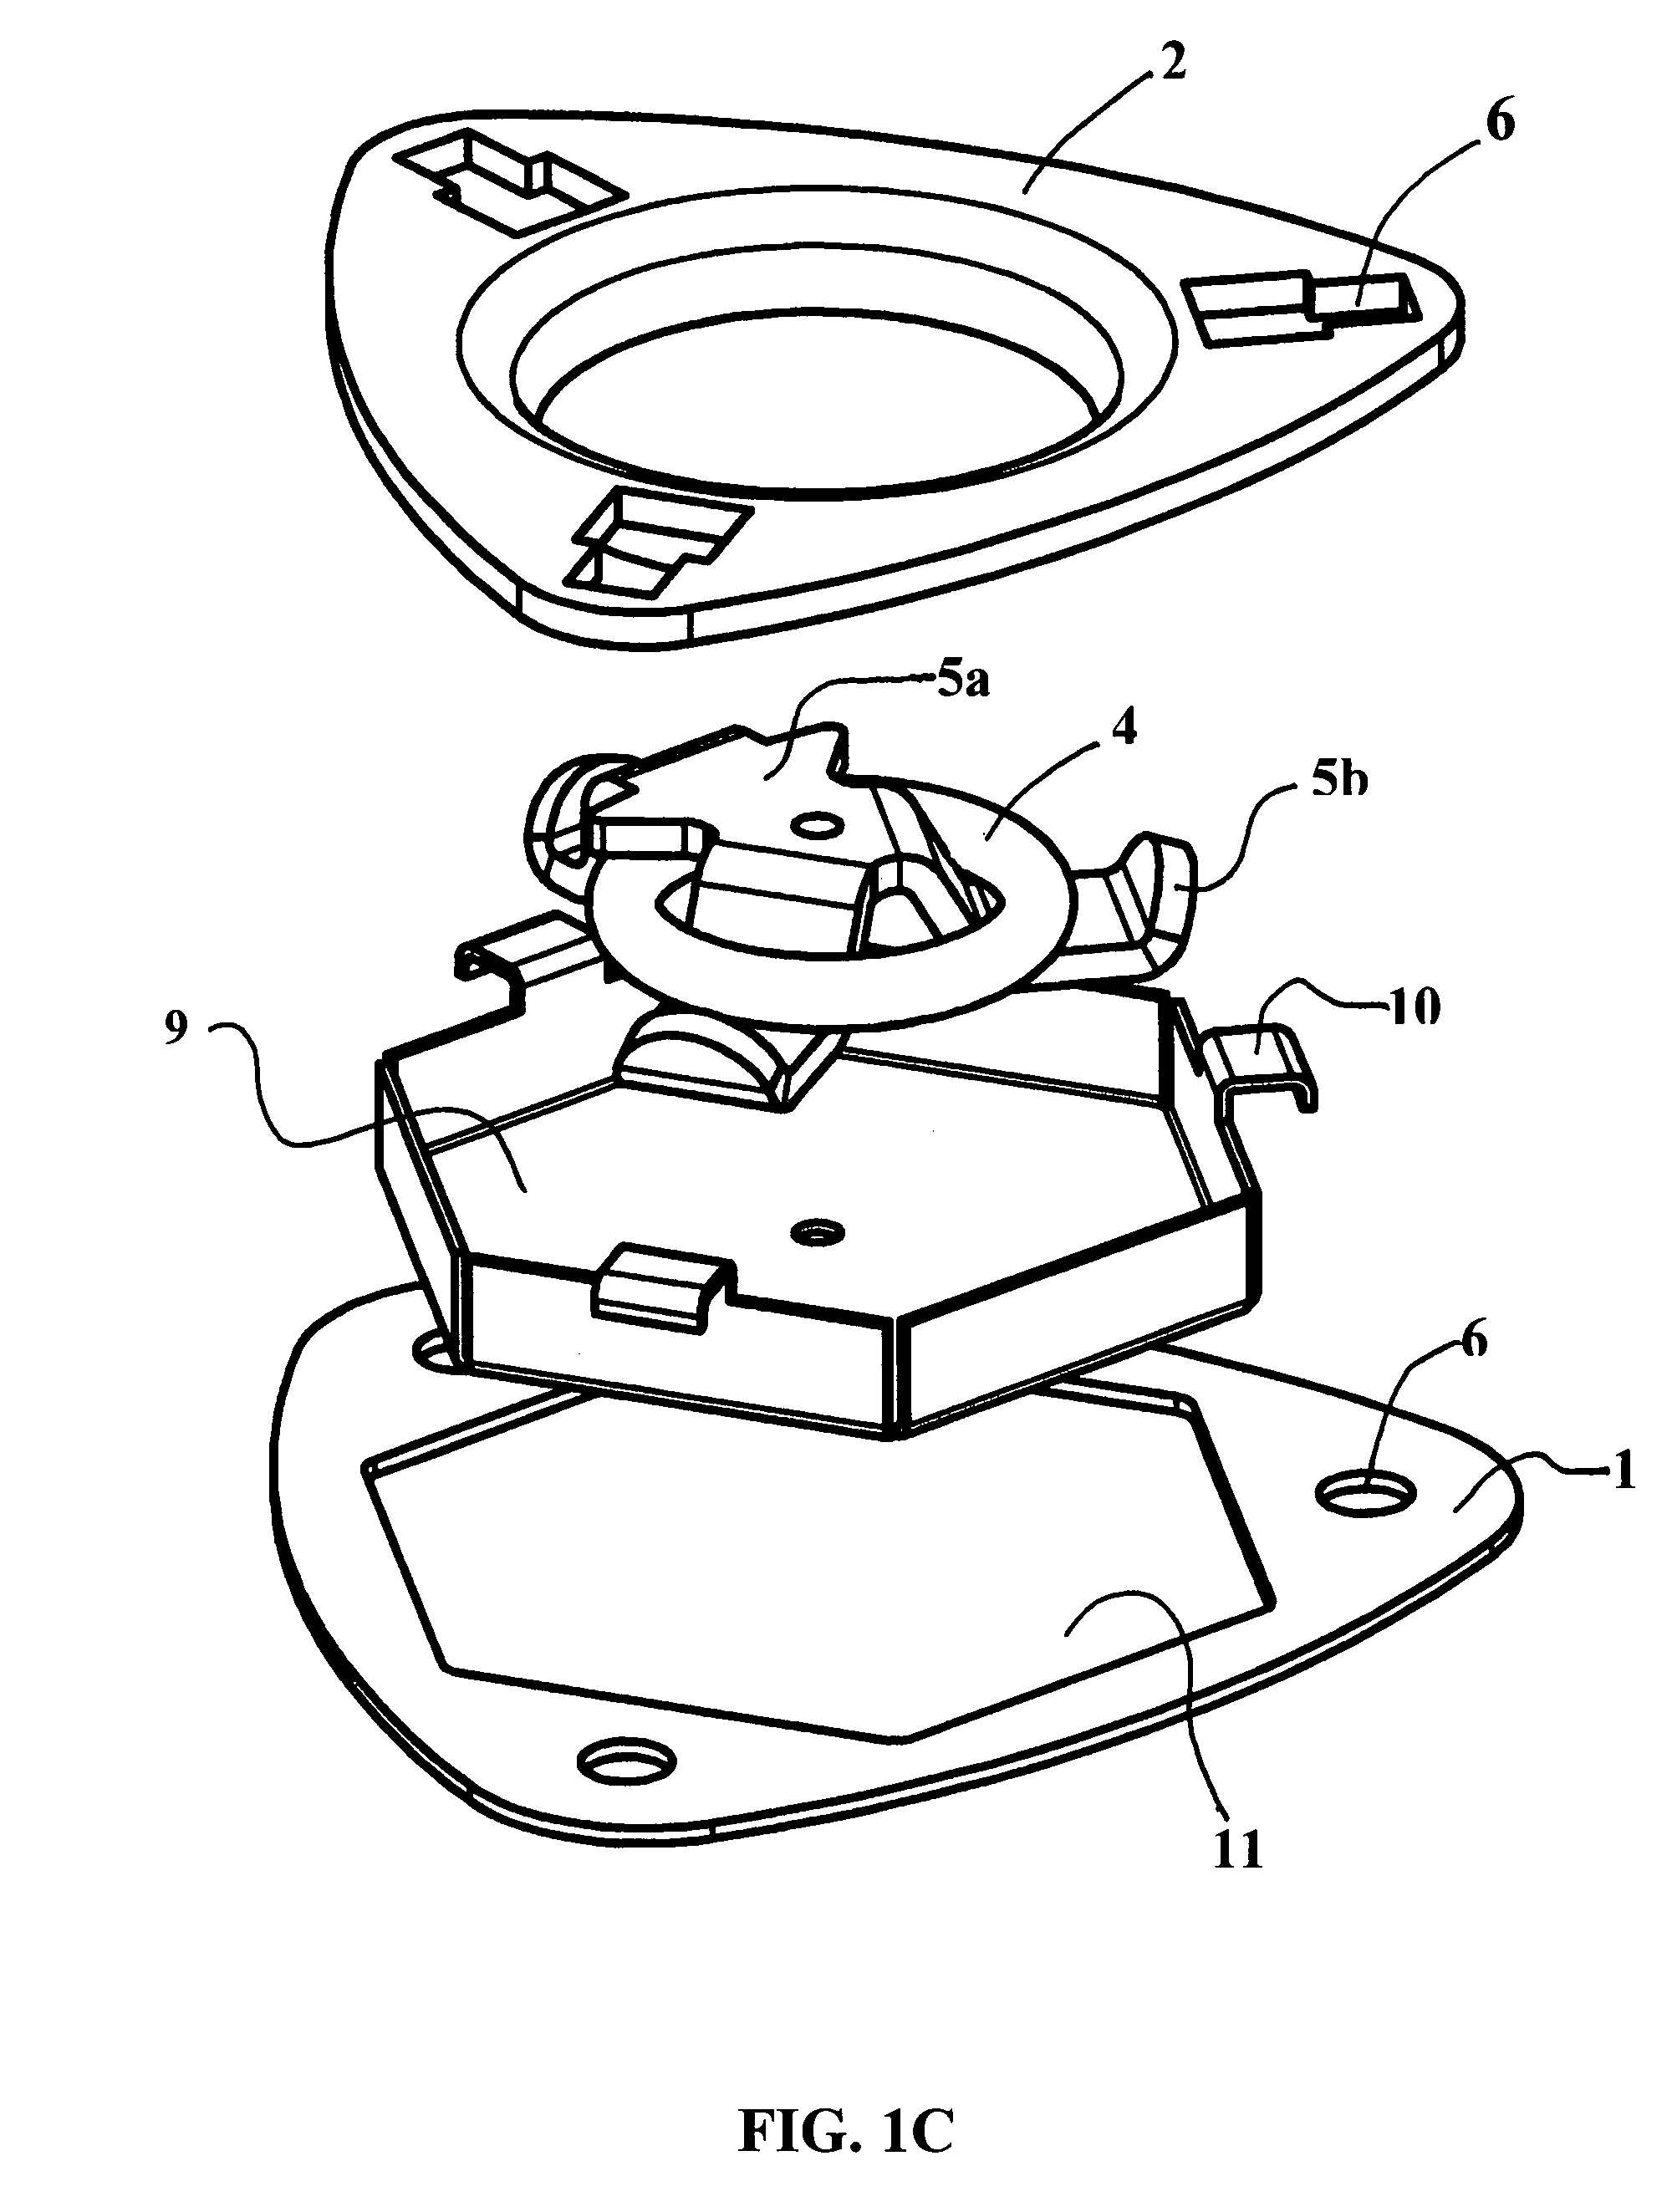 Tie-down anchor system and method